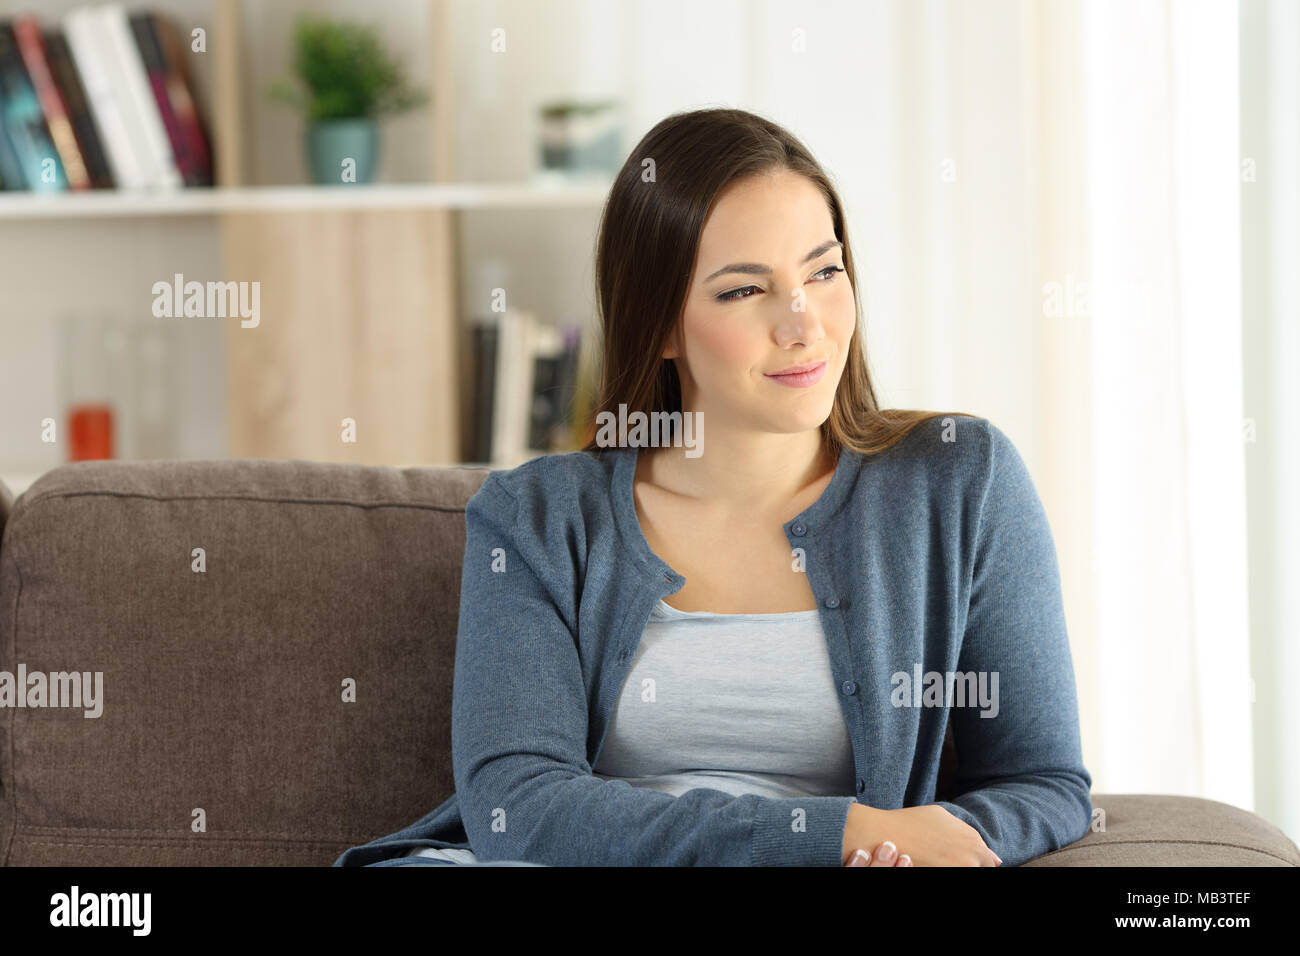 https://c8.alamy.com/comp/MB3TEF/distracted-lady-looking-outside-through-a-window-sitting-on-a-couch-in-the-living-room-at-home-MB3TEF.jpg